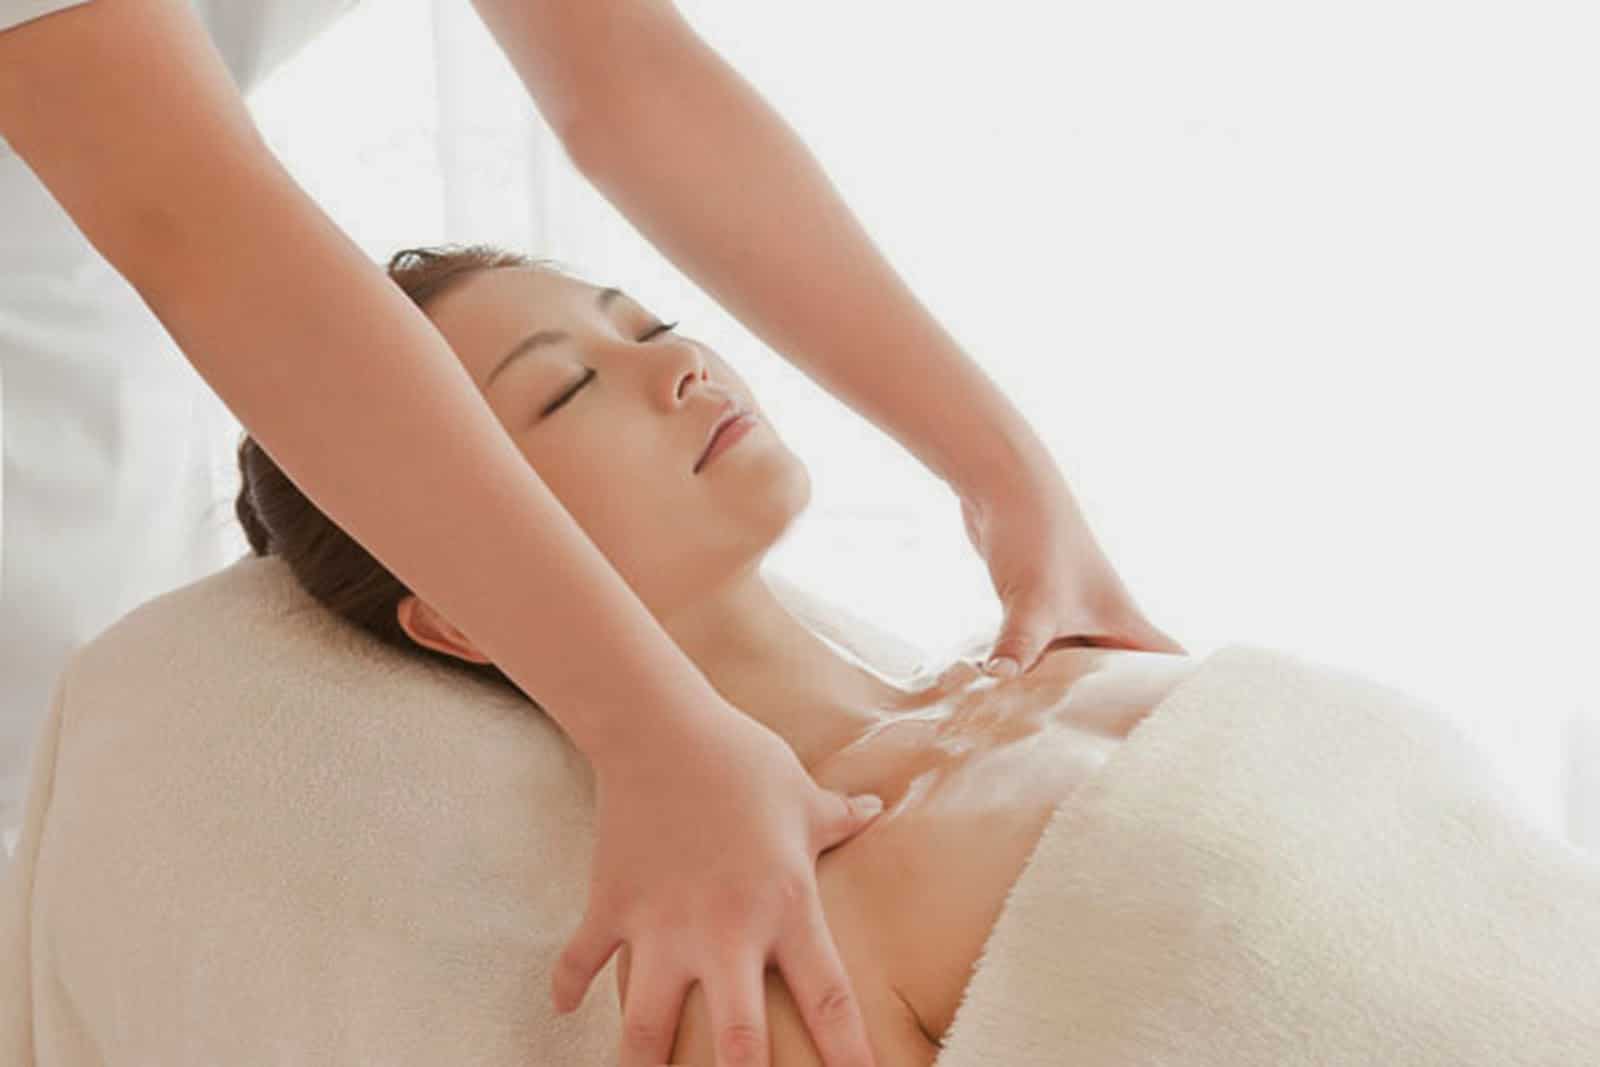 Special japanese massage